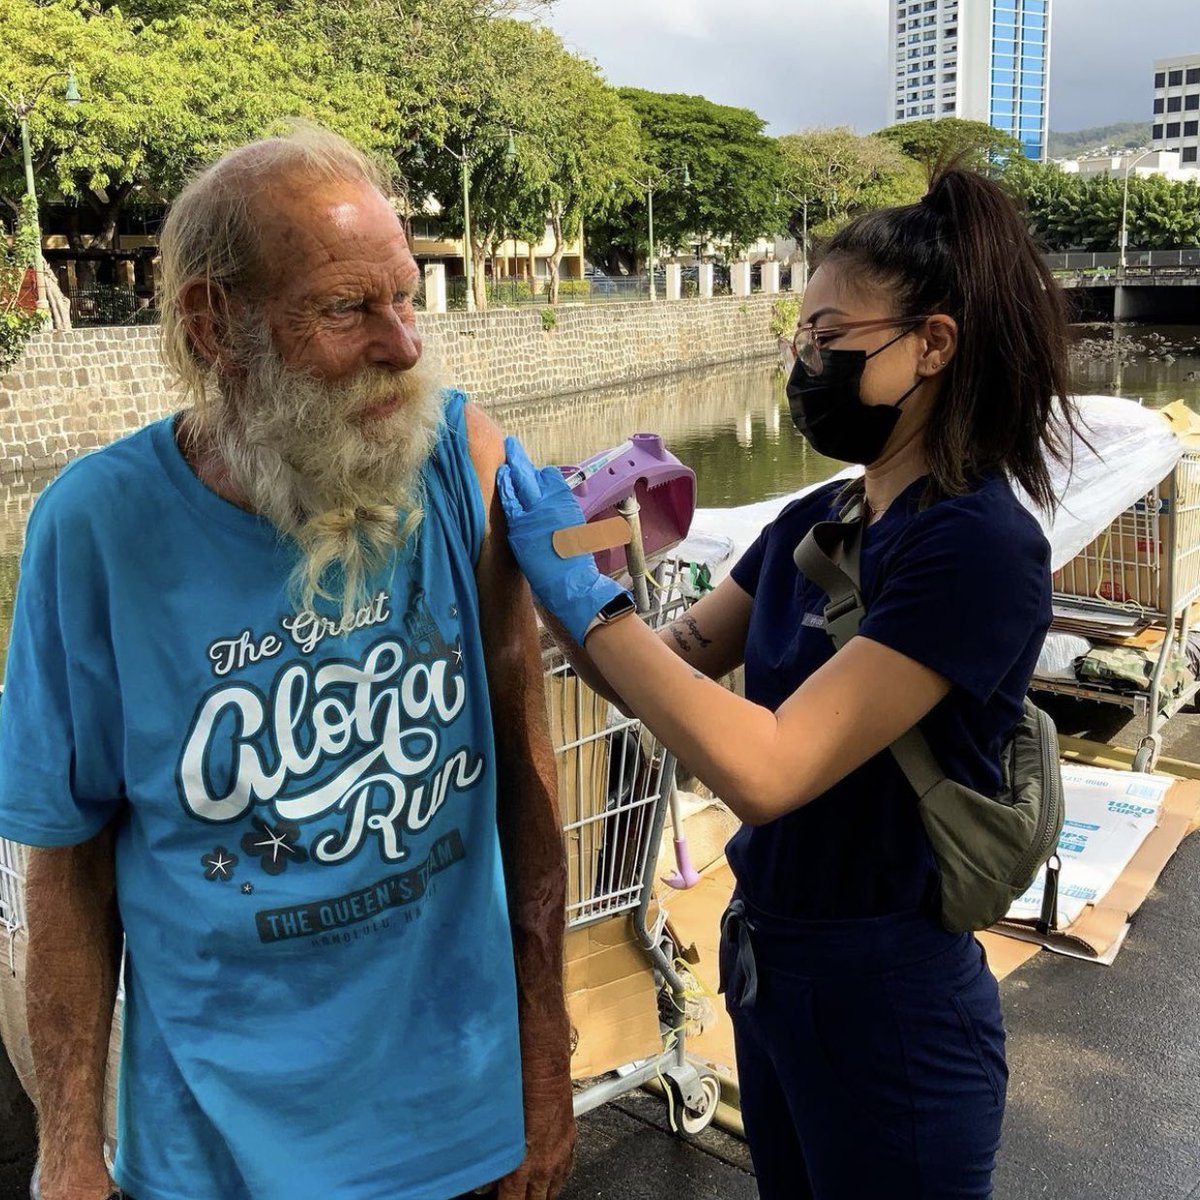 Fridays are for street outreach 💜 catch our street medicine team out in Chinatown every Tuesday & Friday meeting people where they are at 🤟🏽✊🙌🏻🤙🏾 #outreach #streetmedicine #harmreduction #hawaii #aloha #love #houseless